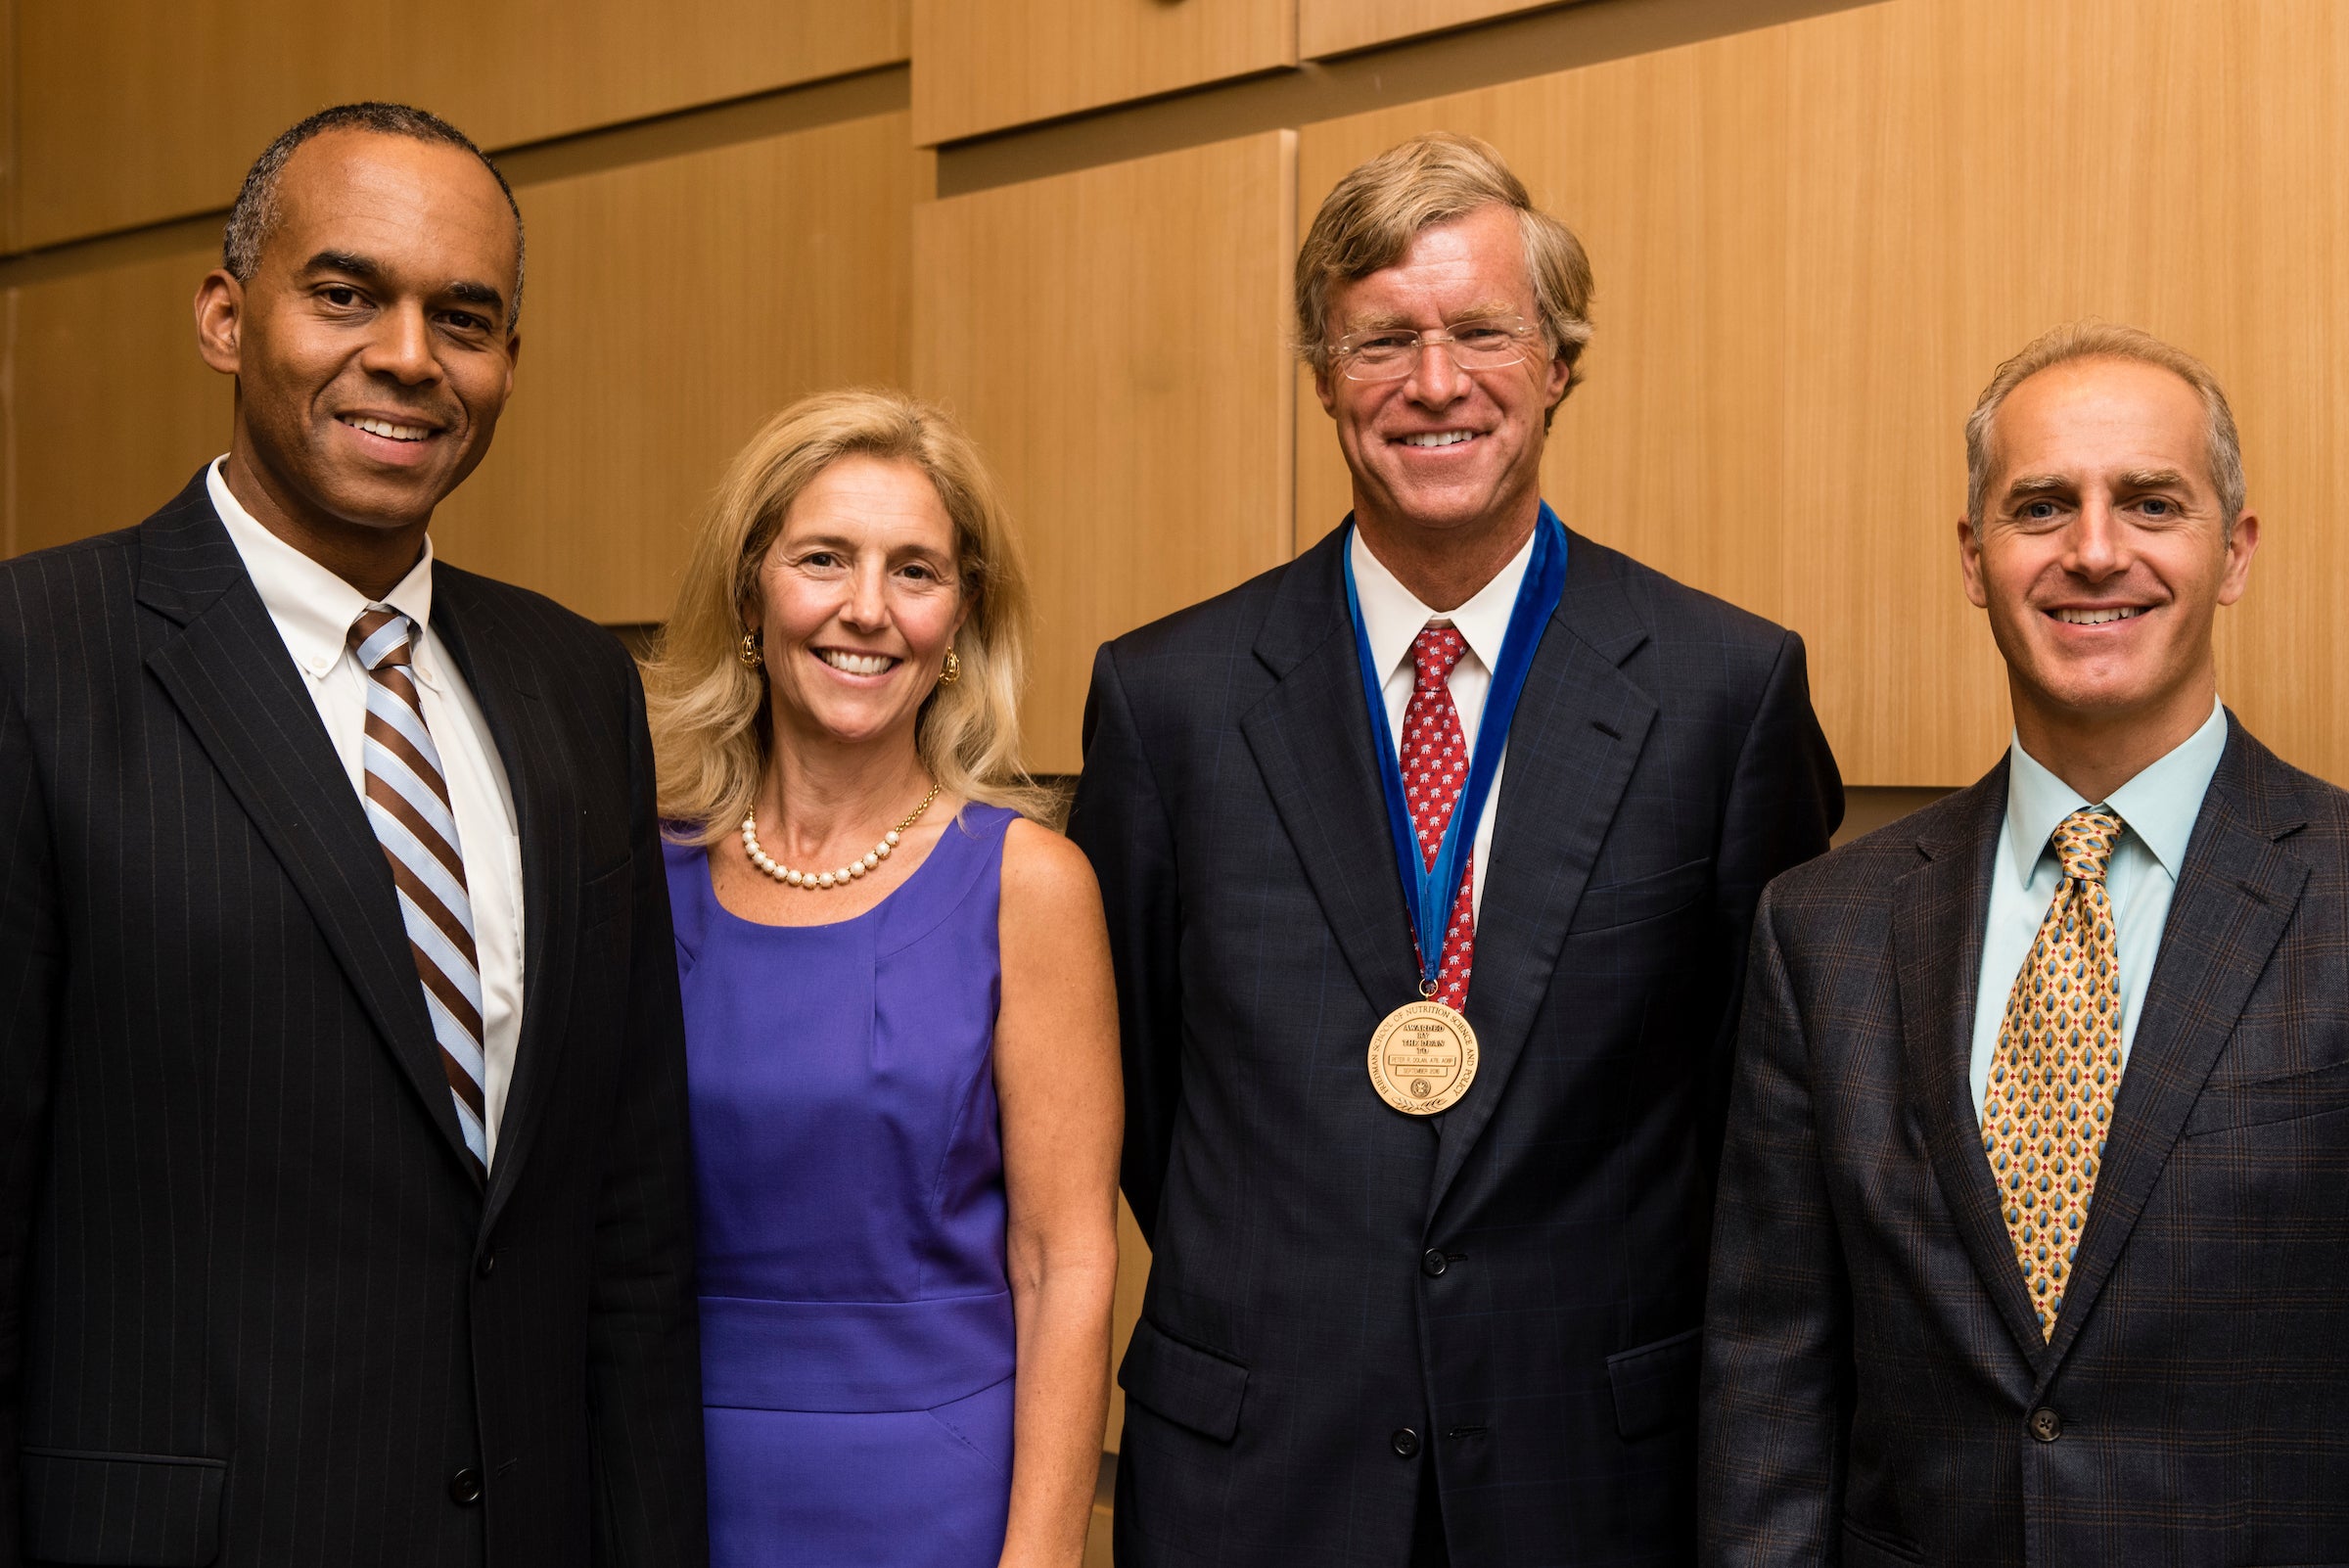 From left: Tufts University Provost David Harris, Christina D Economos, Professor at the Friedman School of Nutrition at Tufts University, Peter R. Dolan, A78, Chair of the Board of Tufts University, and Dariush Mozaffarian, Dean of the Friedman School of Nutrition at Tufts University, pose for a photo together after Dolan was awarded the Friedman School Dean's Medal in recognition to his work on the Child Obesity 180 initiative on September 14, 2016.